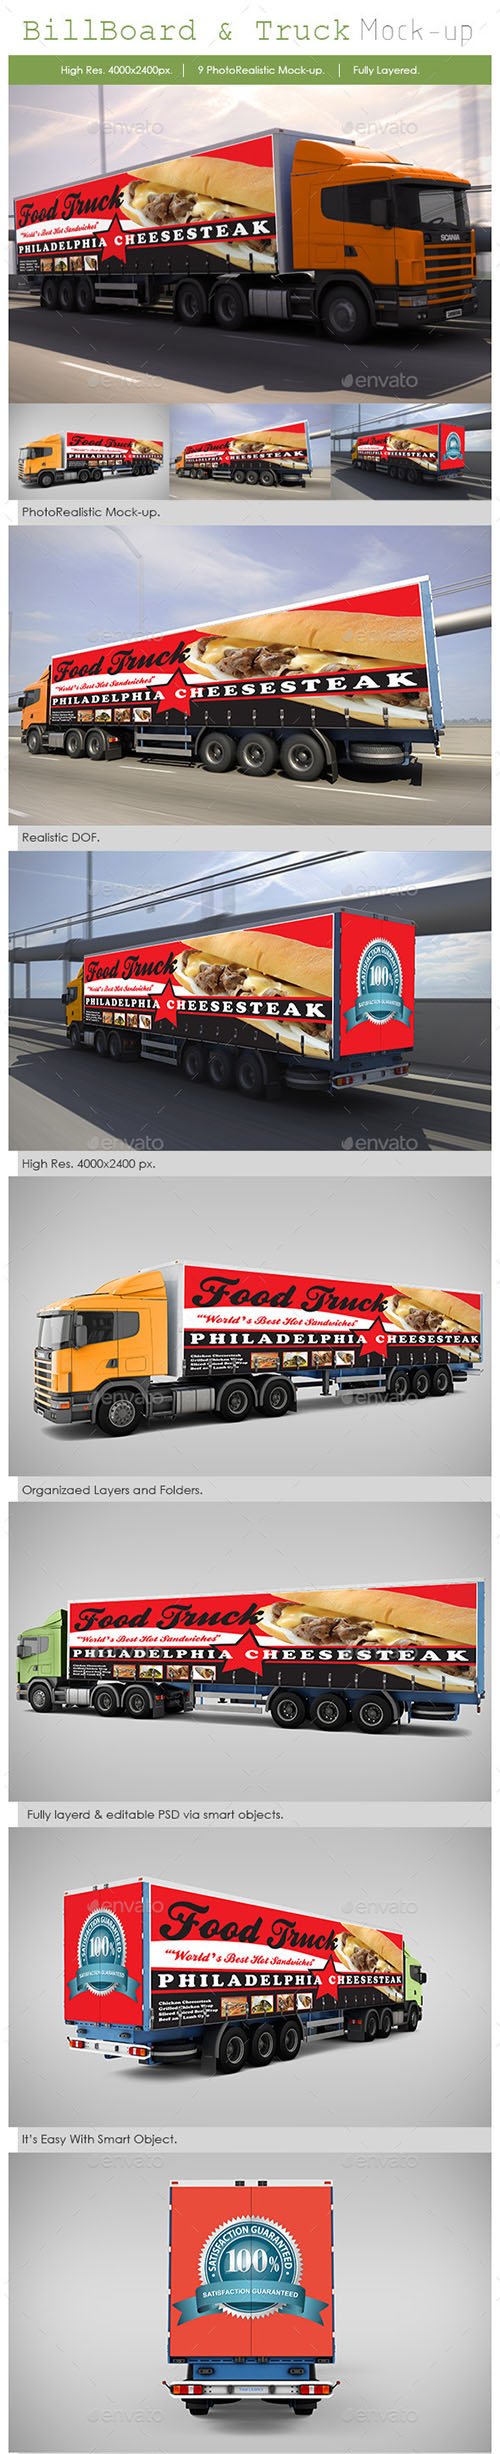 Billboard and Truck Mock-Up - Graphicriver 5310583